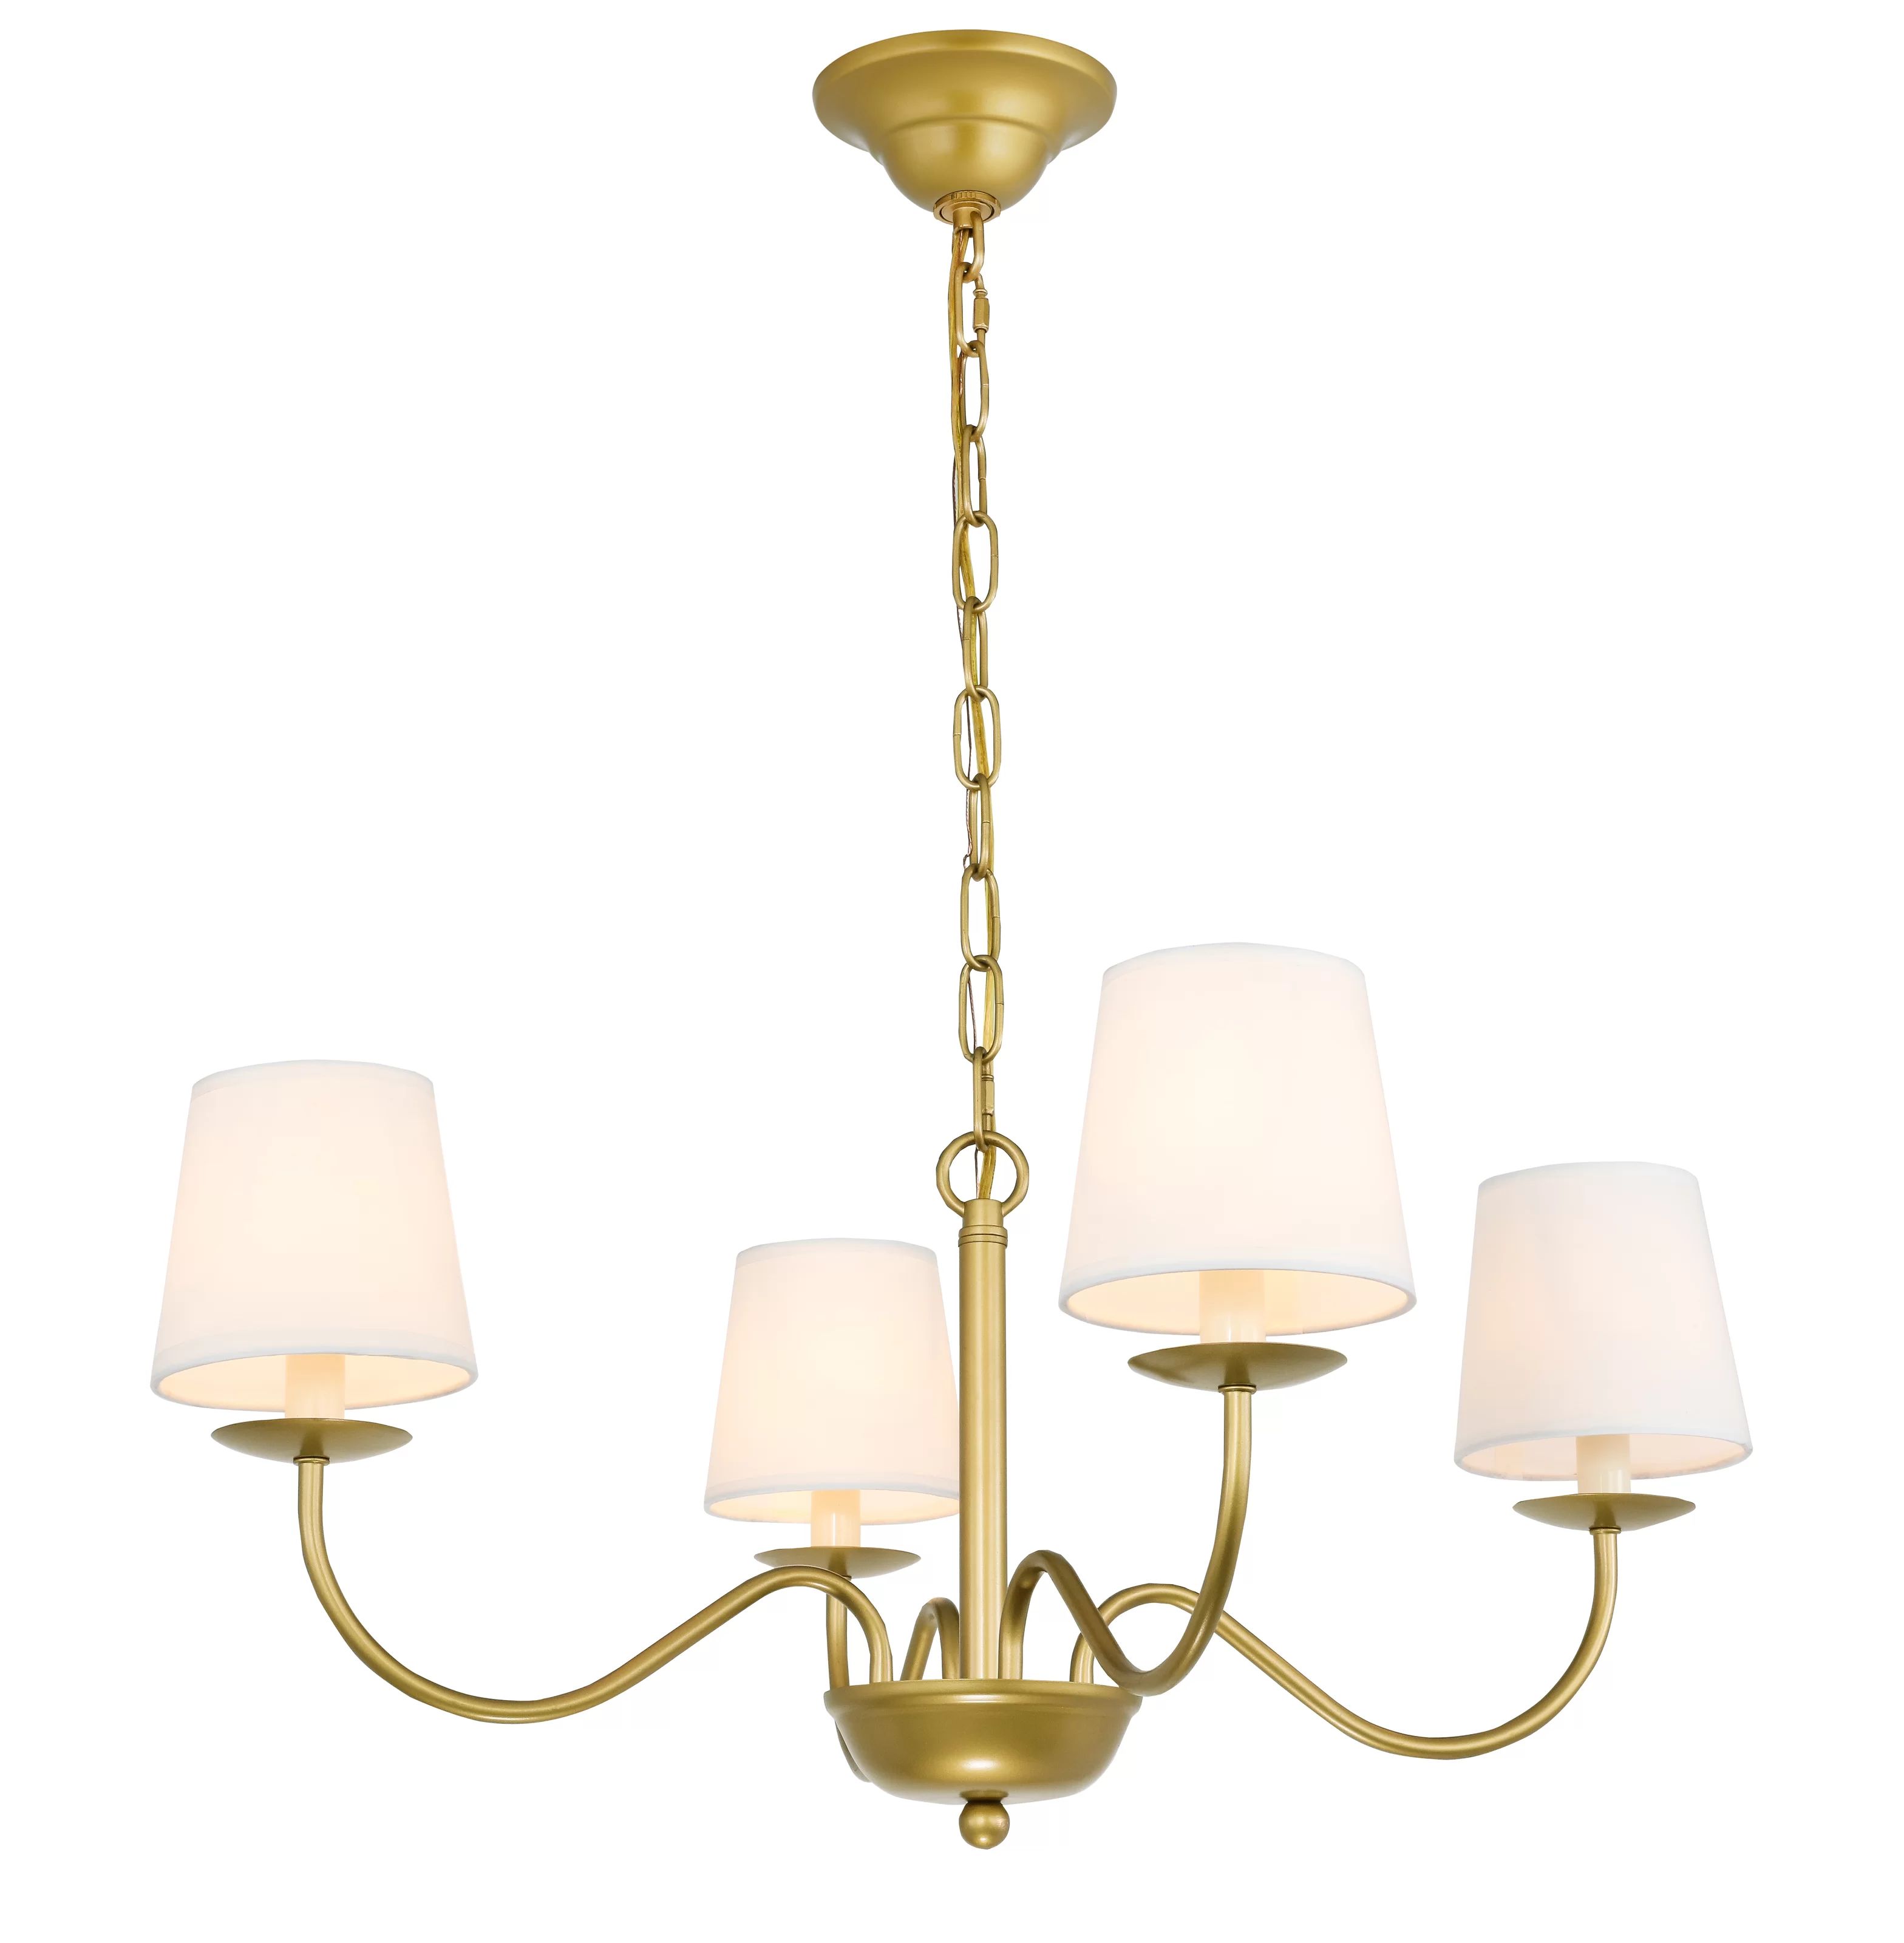 Behrendt 4 - Light Shaded Classic / Traditional Chandelier | Wayfair North America